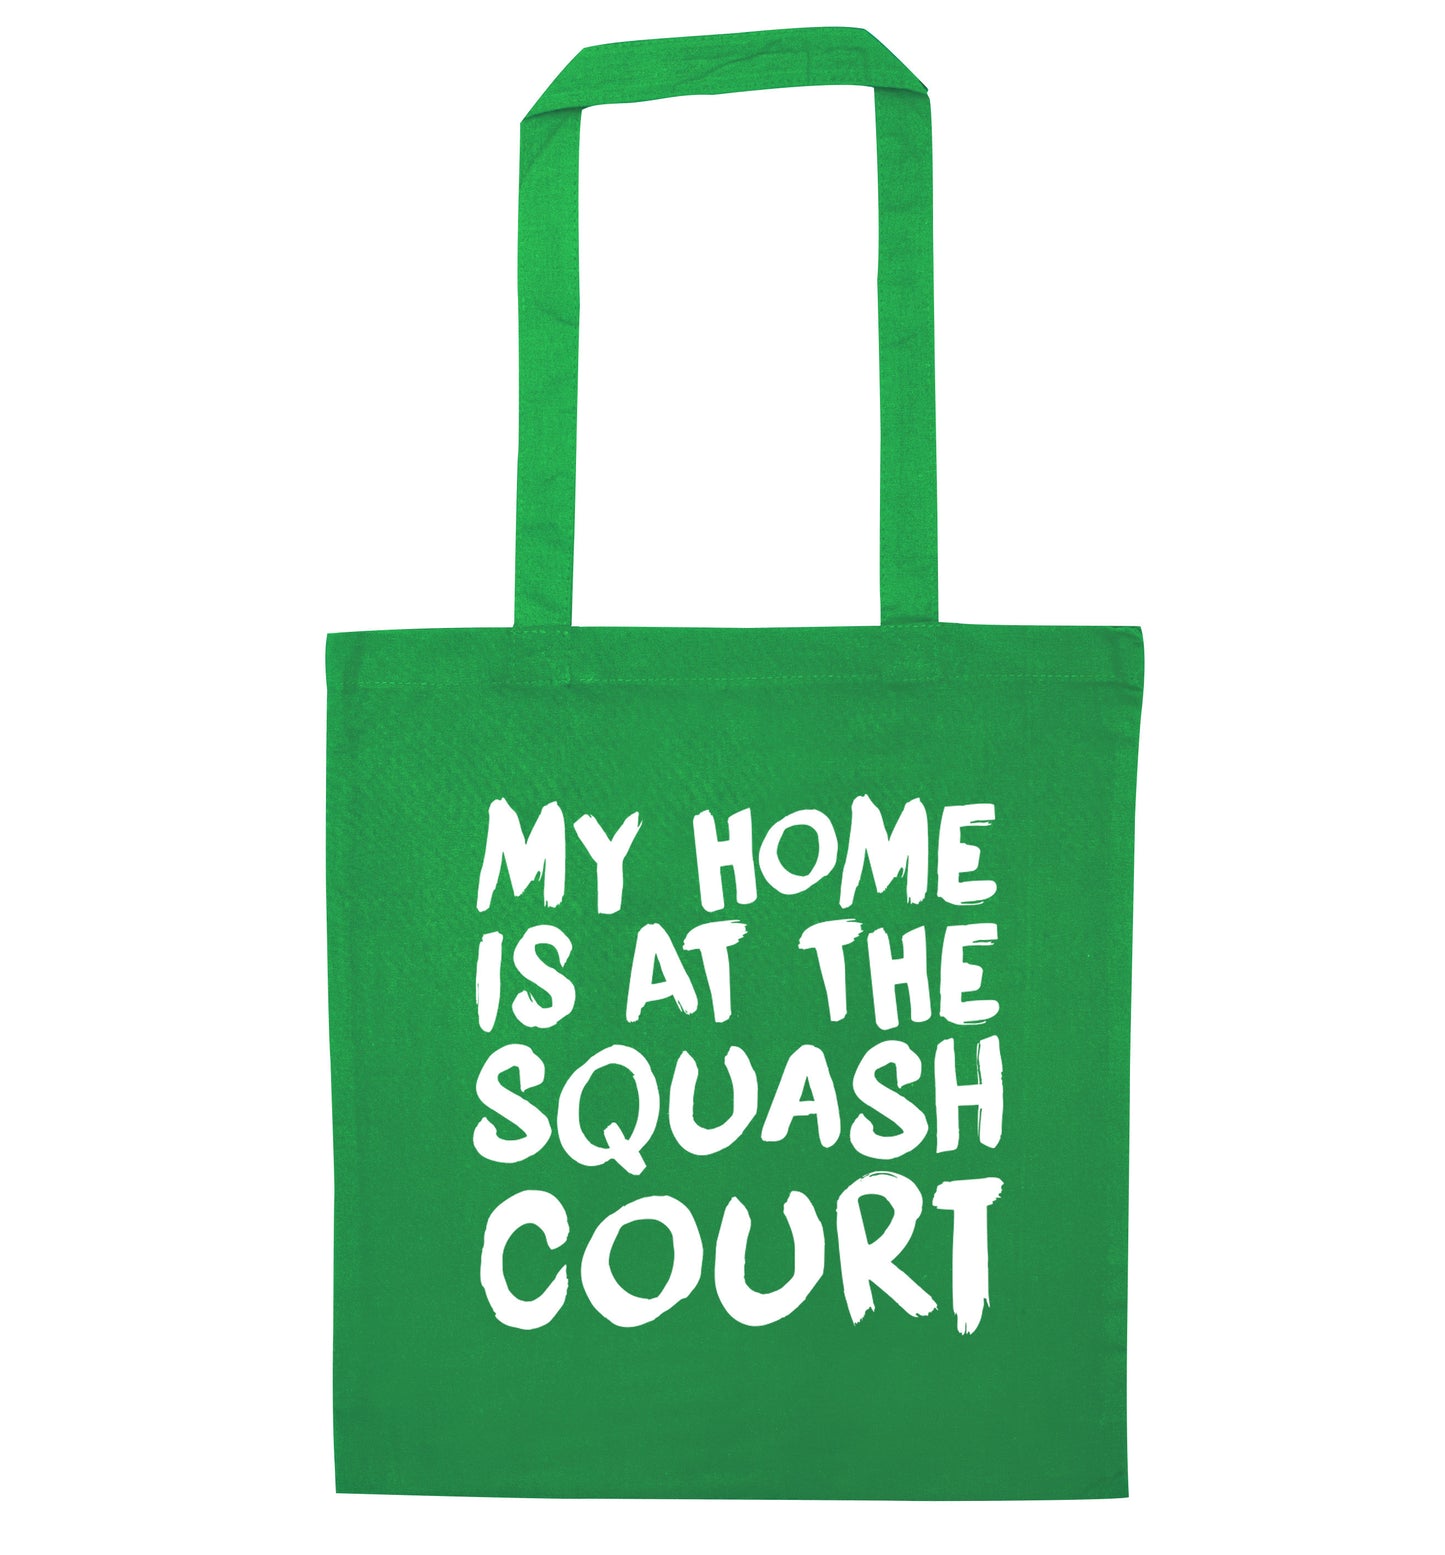 My home is at the squash court green tote bag